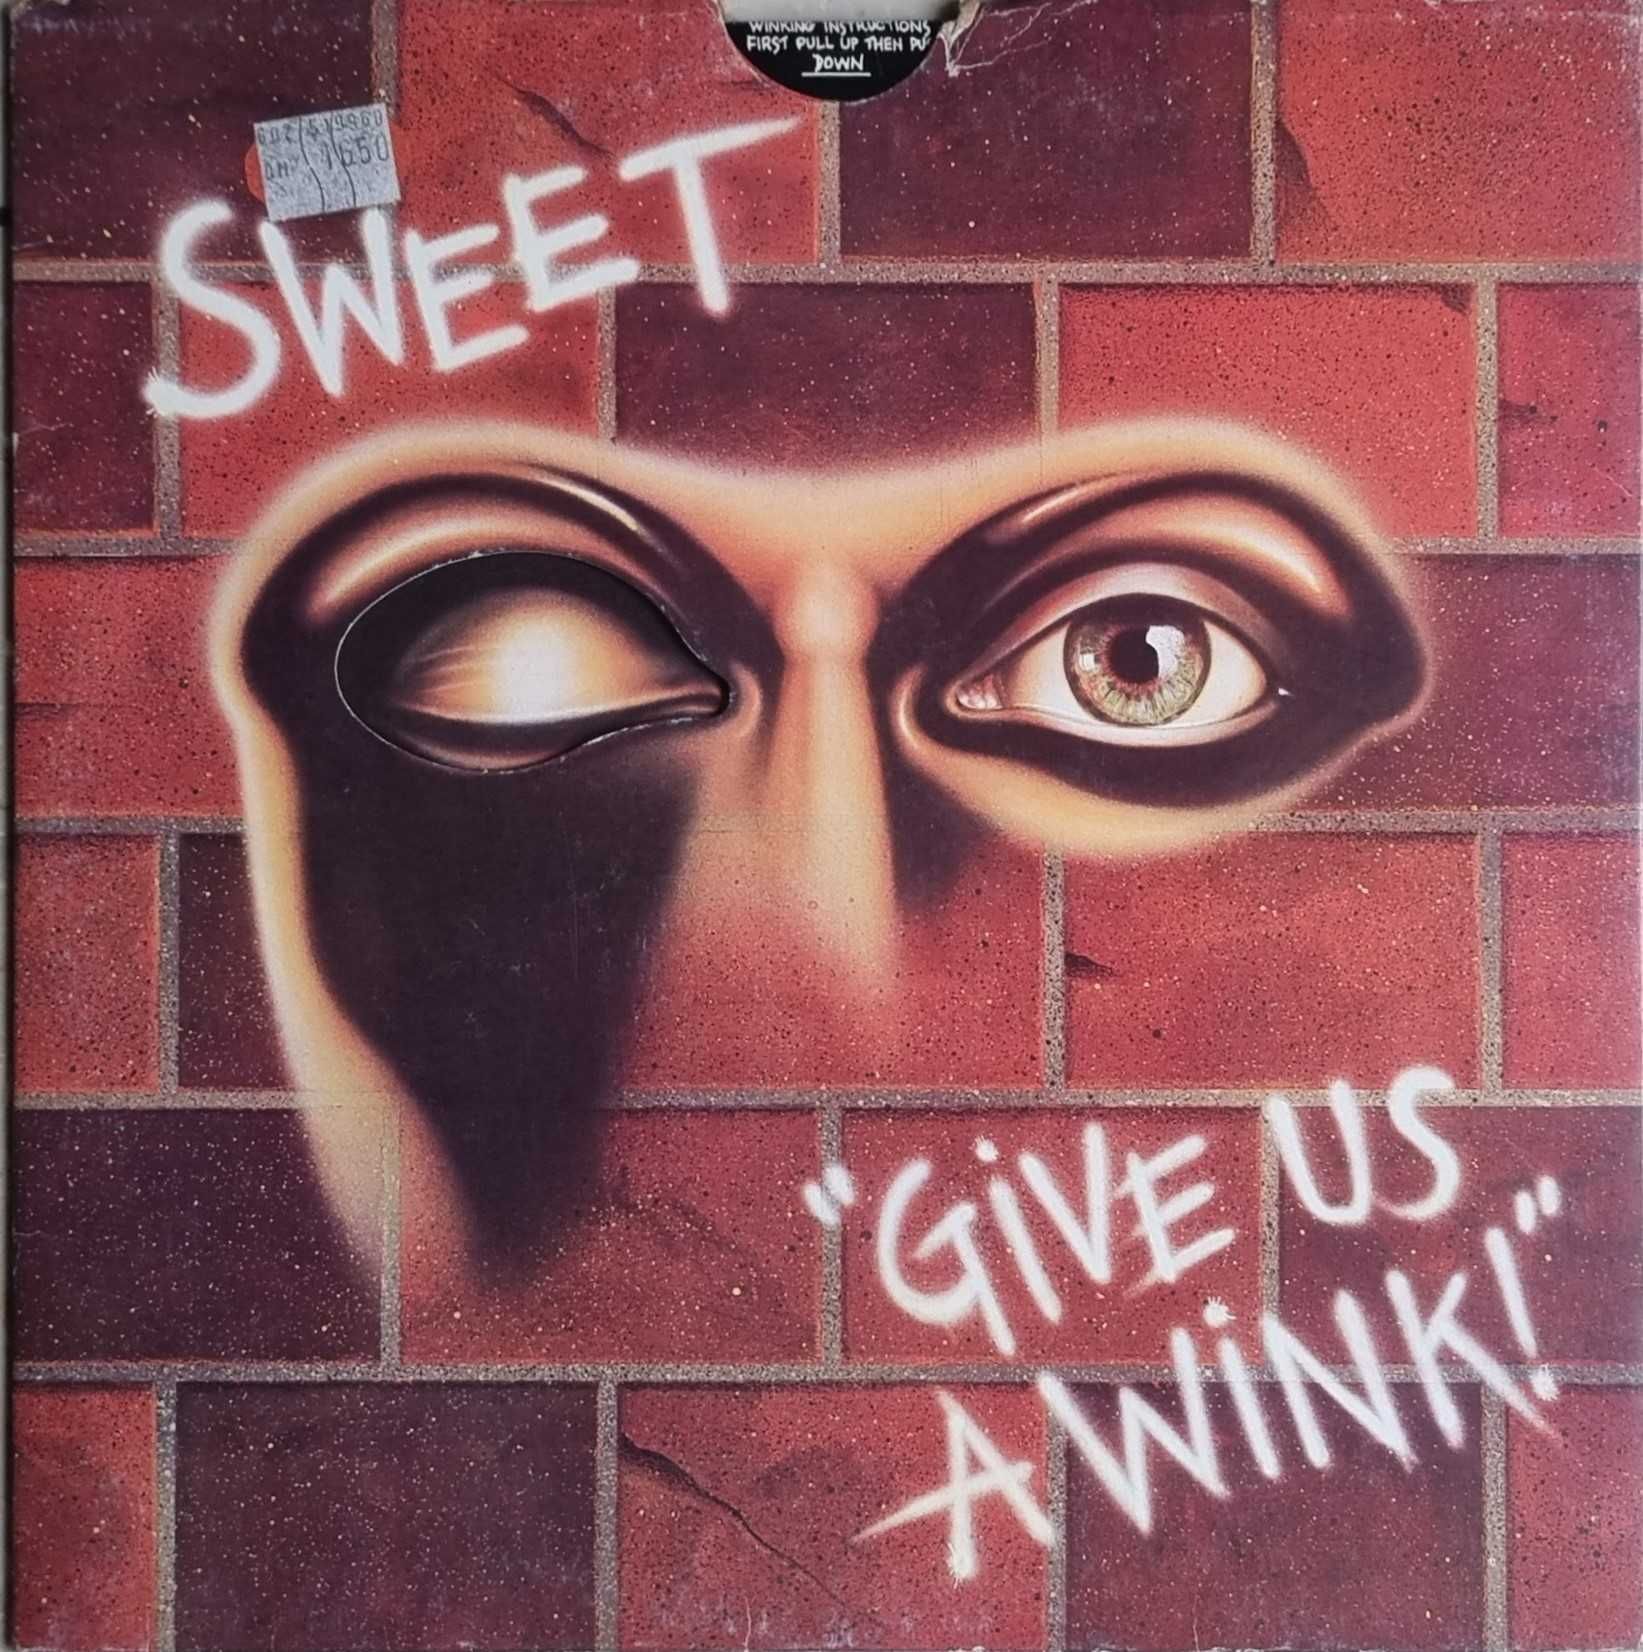 The Sweet – Give Us A Wink GERMANY 1976